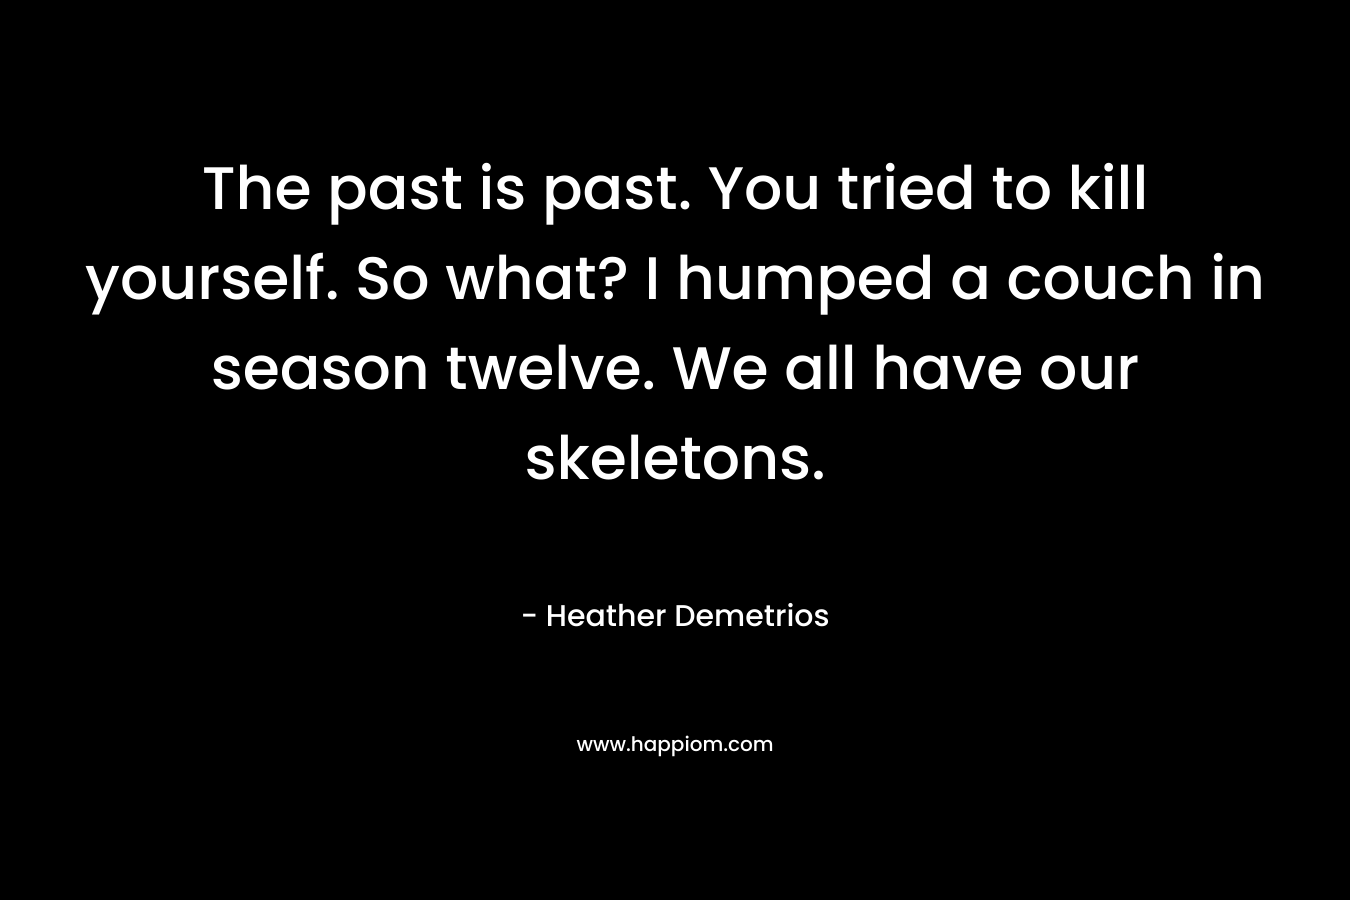 The past is past. You tried to kill yourself. So what? I humped a couch in season twelve. We all have our skeletons. – Heather Demetrios